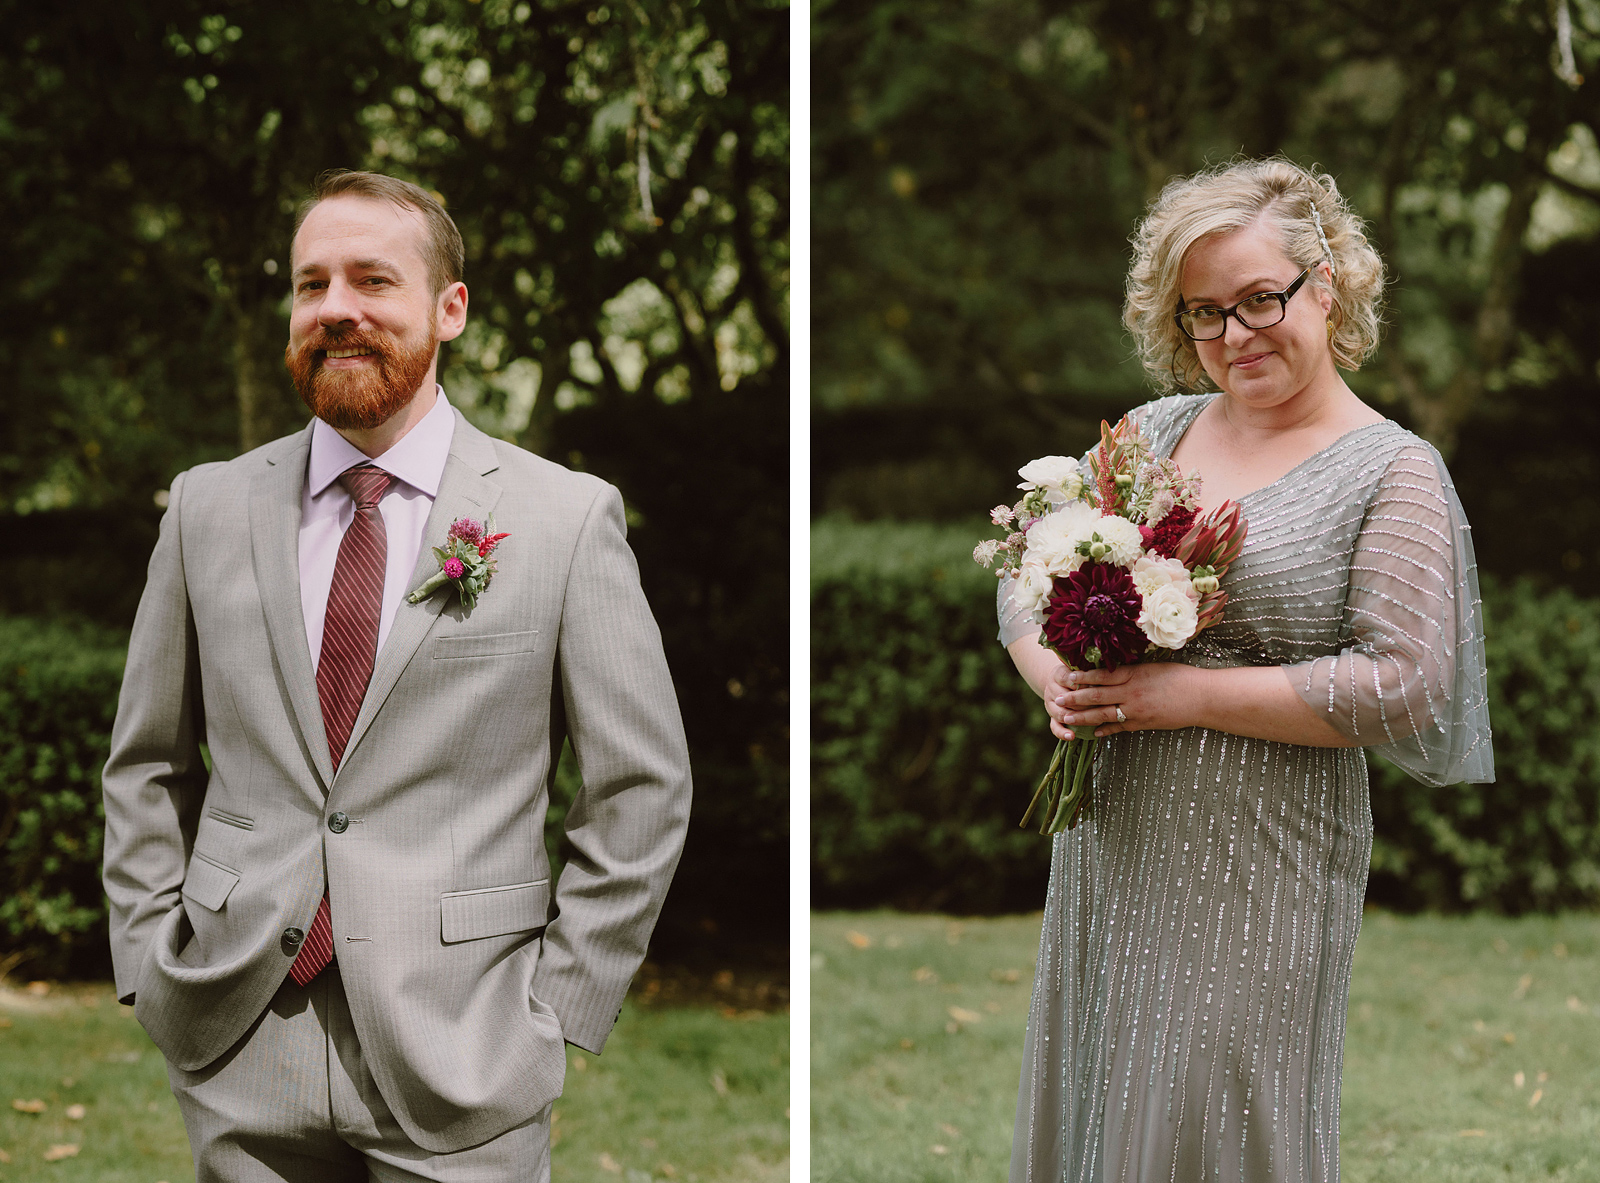 Solo portraits of the Bride and Groom at their Oaks Pioneer Church wedding in Sellwood, OR